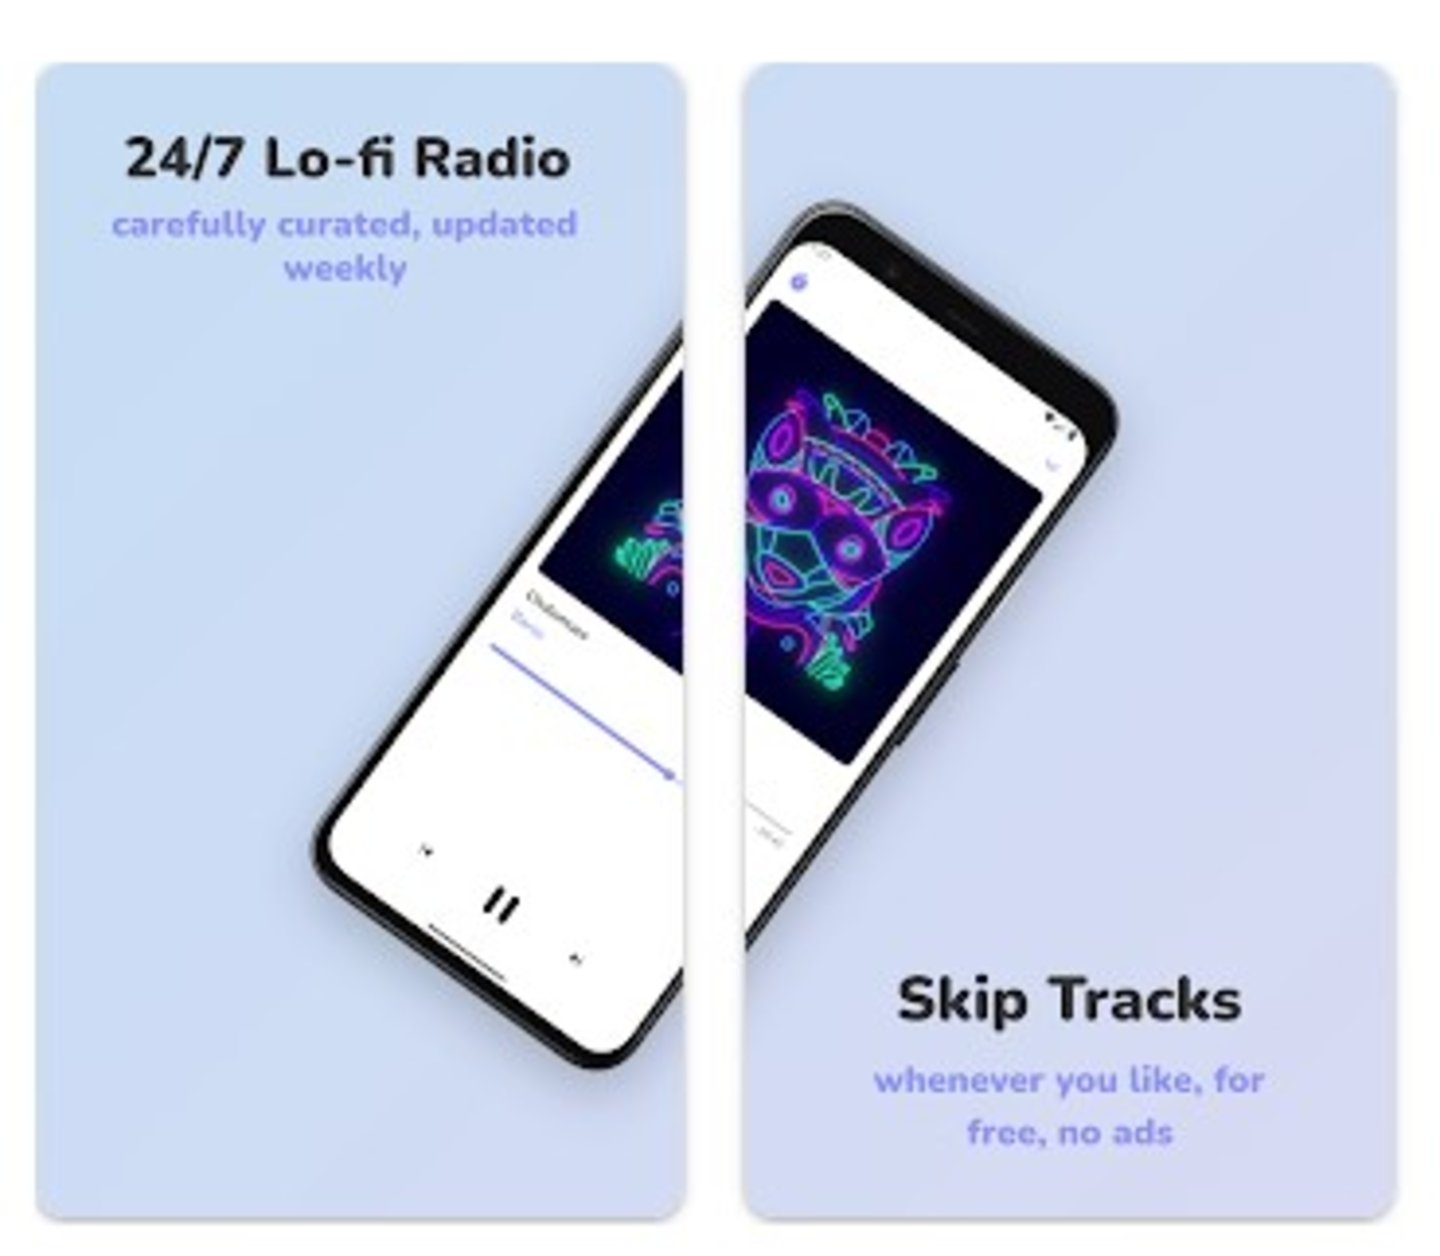 Promotional images of the Lofi Clouds app.